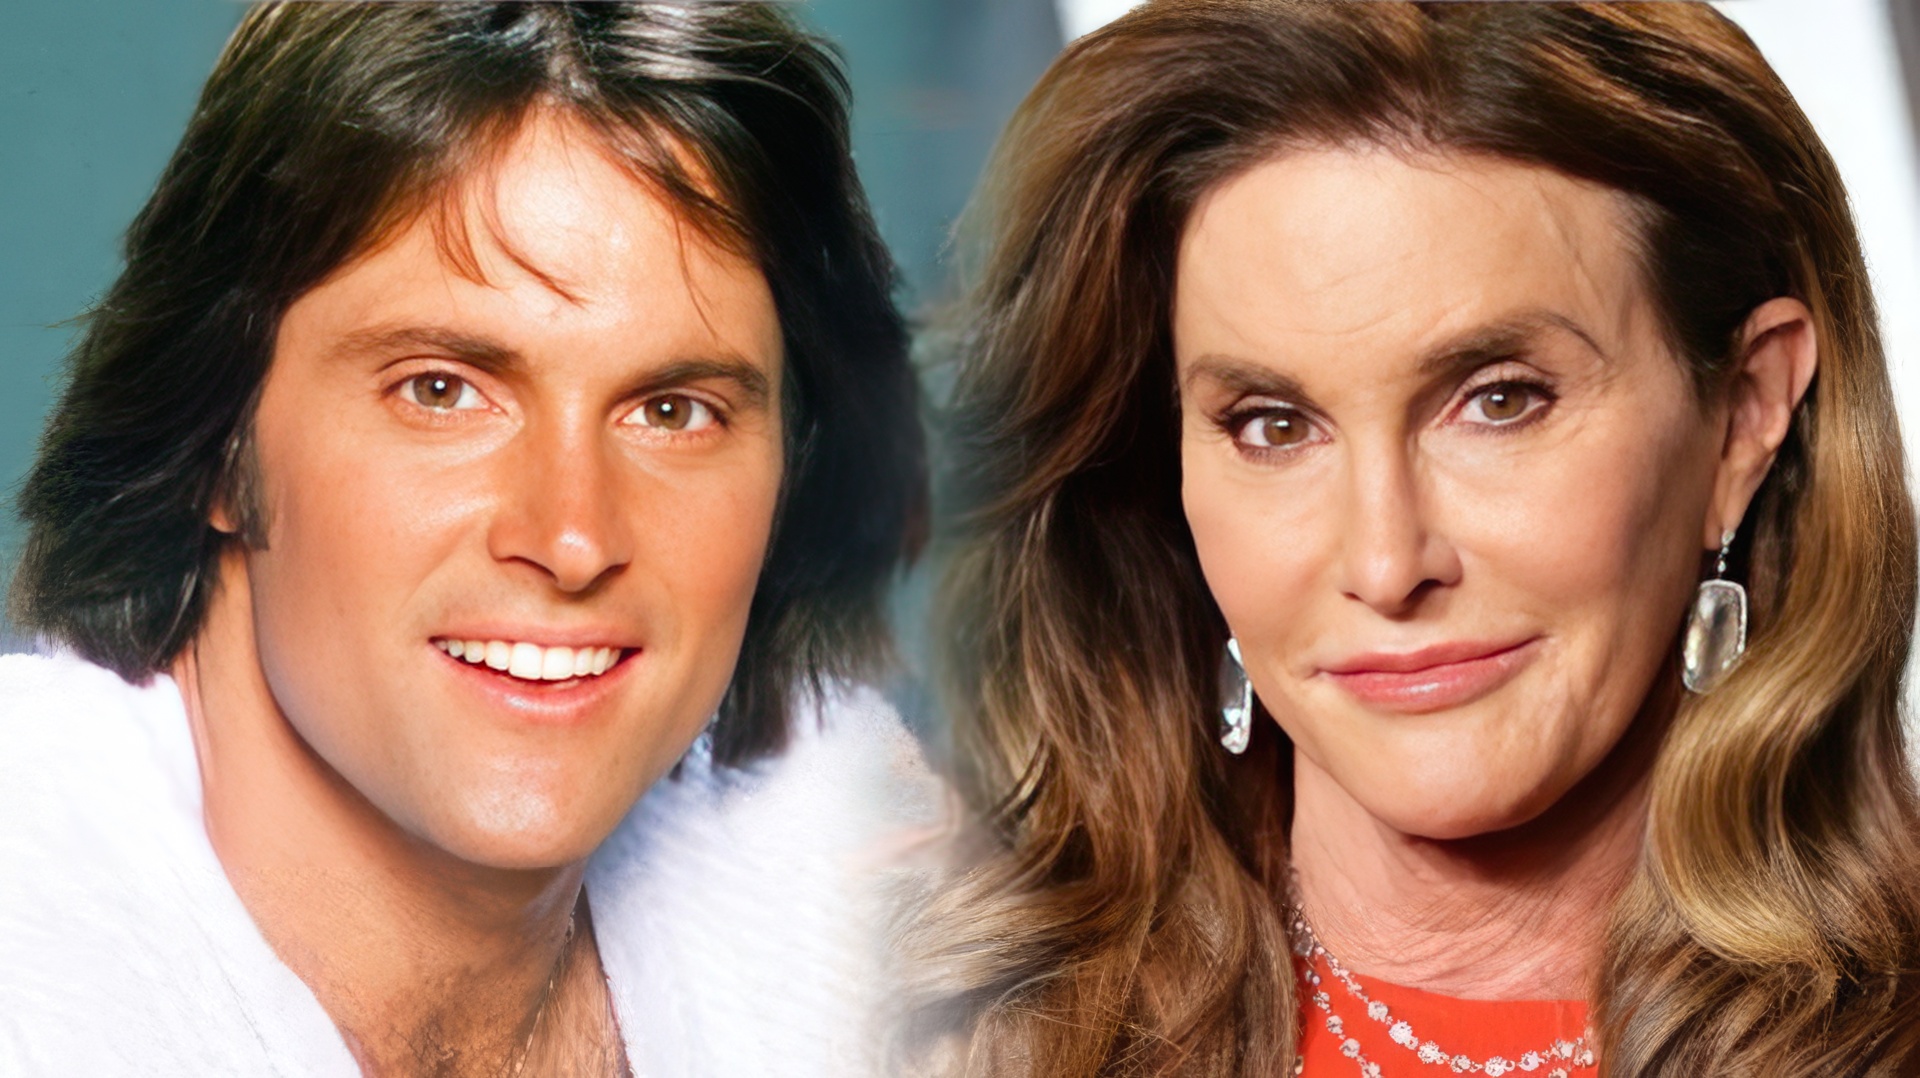 Caitlyn Jenner before and after the change